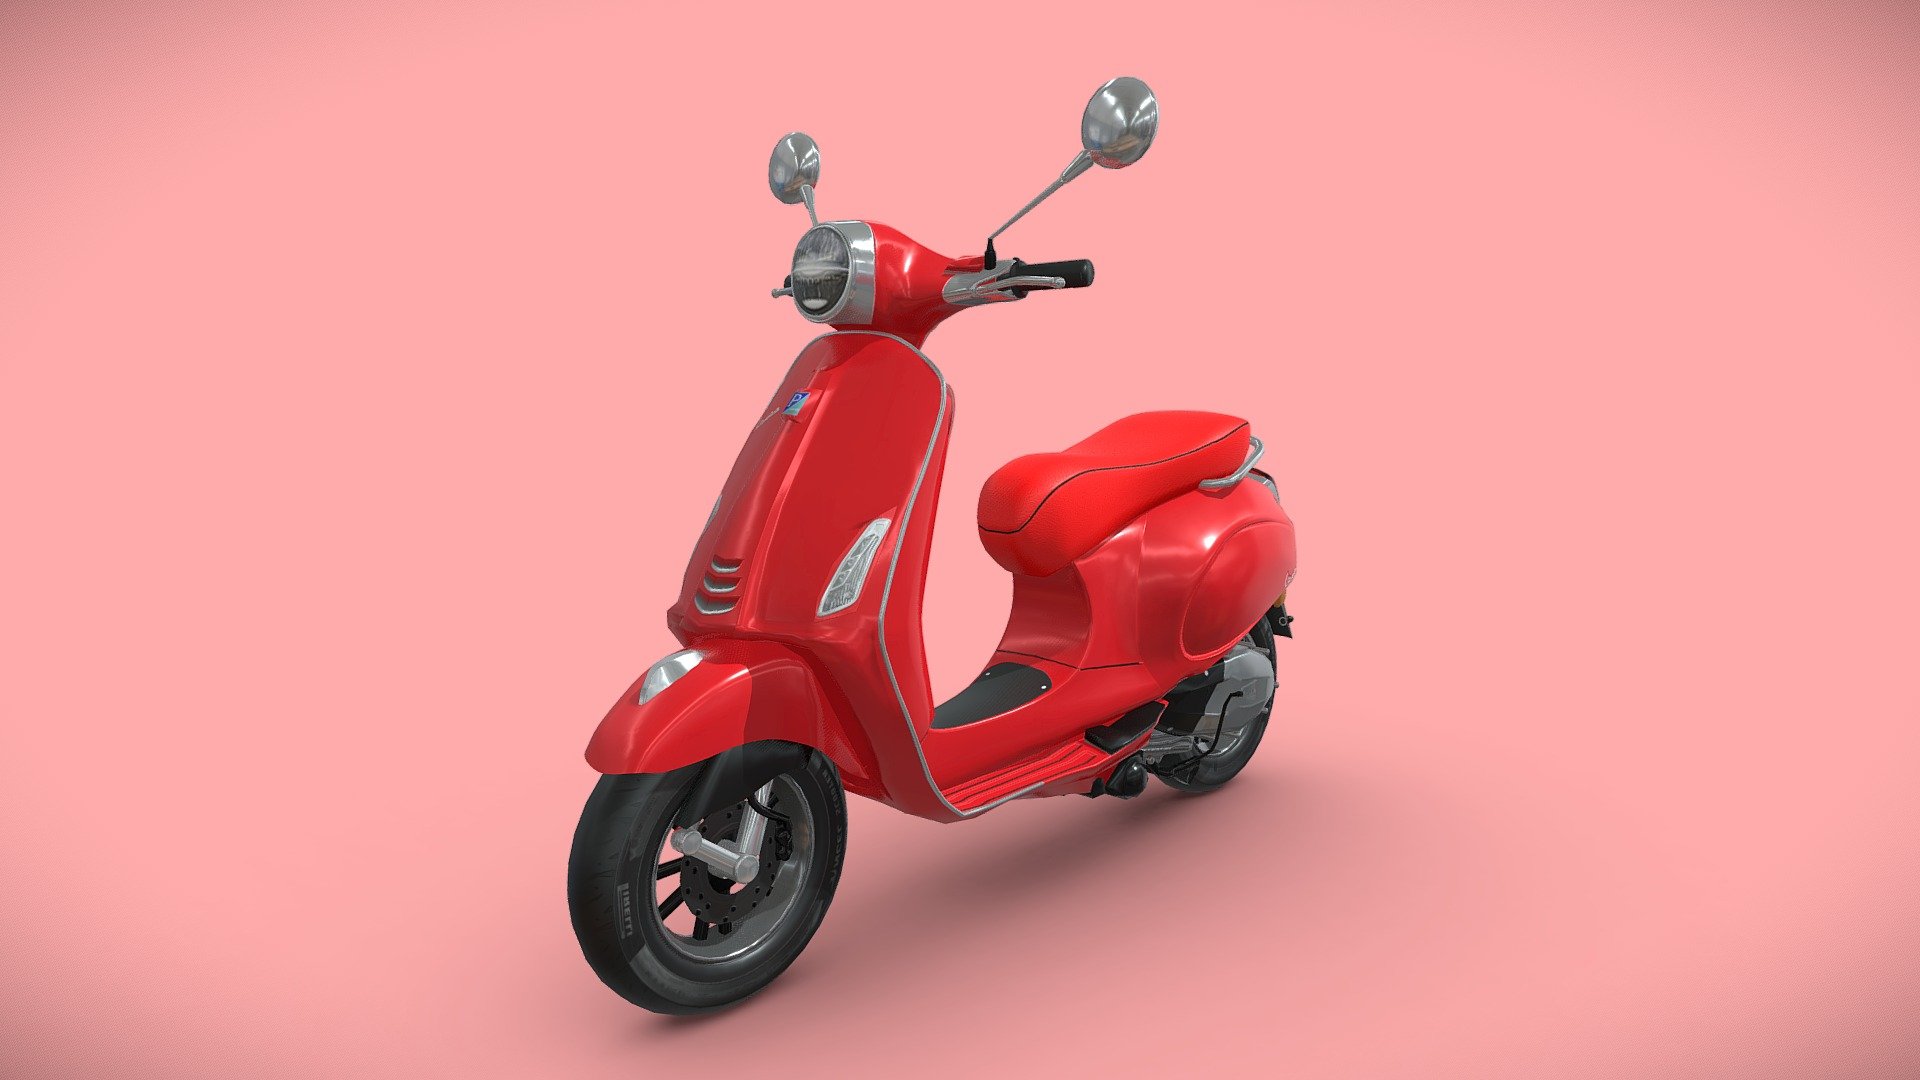 This is Vespa Primavera 150 model of Scooty 3d Model.

This is in Rosso Red Color of Vespa Primavera 150.

The model was created in Maya 2018, rendered with Substance painter, Clean topology based on quads. Detailed High quality model.

All Materials in this pack are provide with all named.

Model Type: Polygonal
Polygons: 18,341
Vertices: 18,897
Formats available: Maya ASCII 2018, Maya Binary 2018, FBX , OBJ
Textures: Color, Normal, Metallic, Roughness, Ambient Occlusion, Curvature and Thickness
Texture Resolution: 4096 x 4096 pixels

If the price is not suitable for you can contact me and discuss the price.

Please don't forget to rate the model.

Hope you like it!

Thank You 3d model